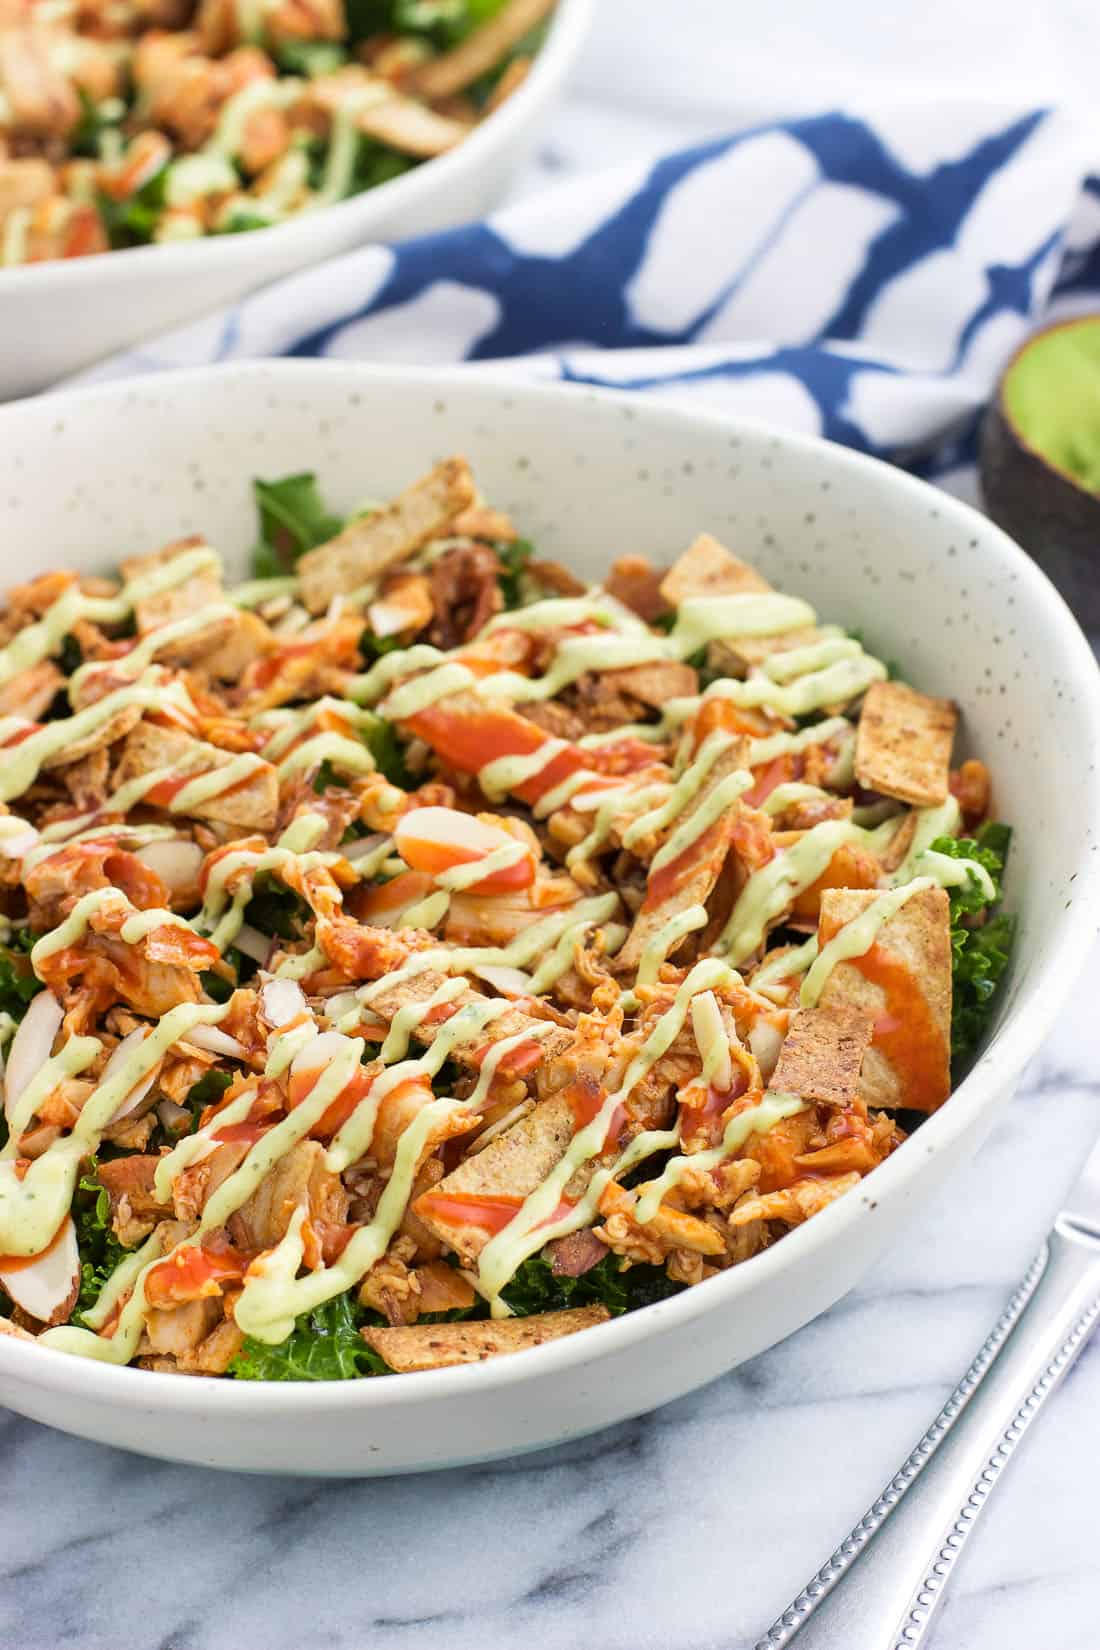 A large bowl of salad featuring buffalo chicken, tortilla strips, almonds, a buffalo sauce drizzle and avocado ranch dressing